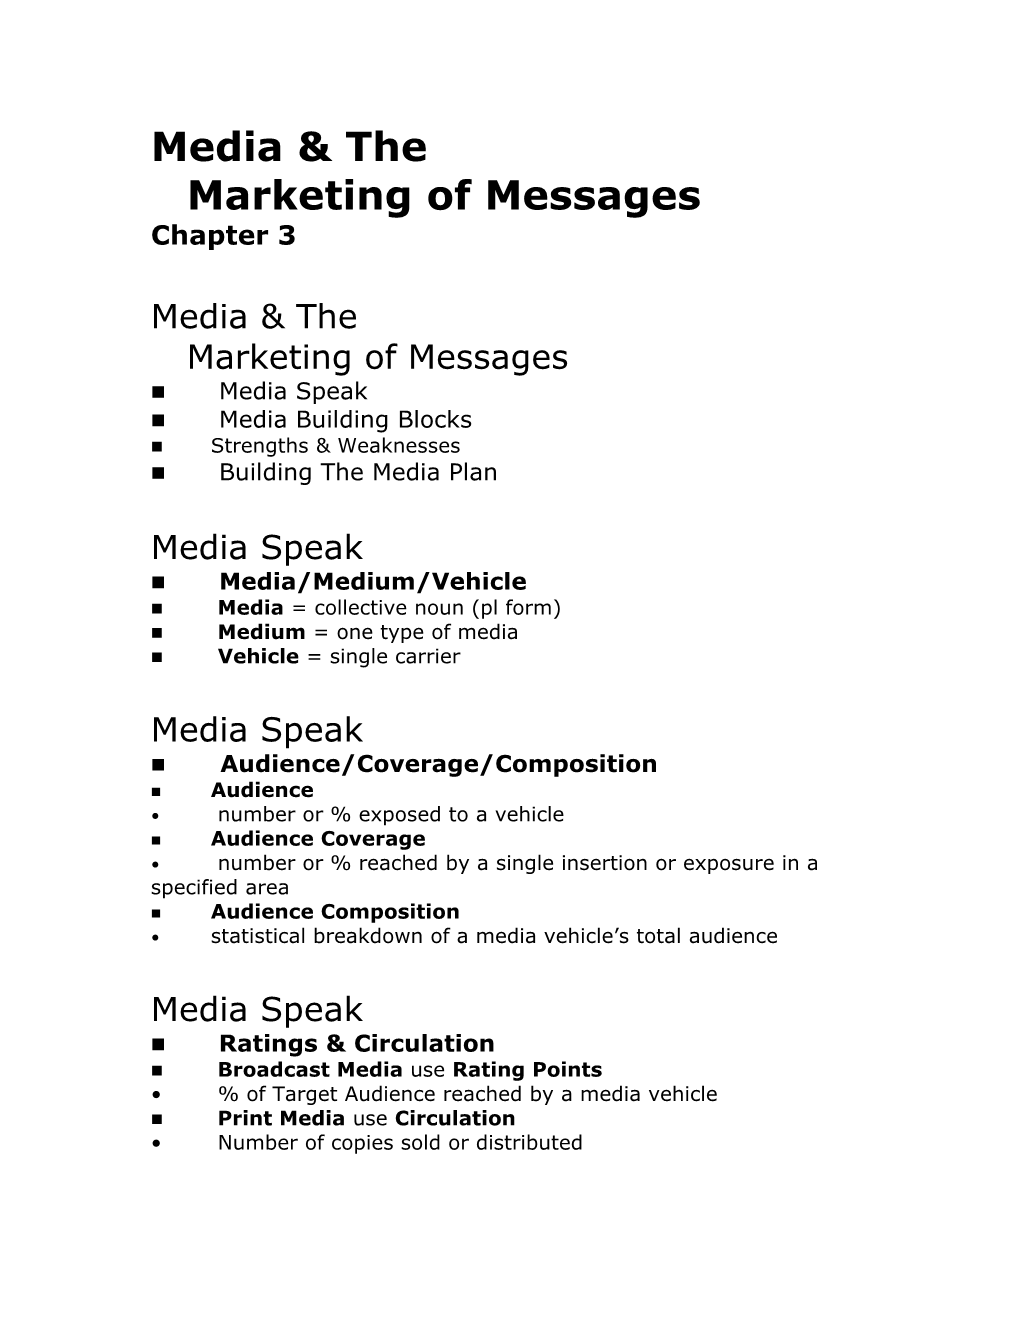 Media & the Marketing of Messages